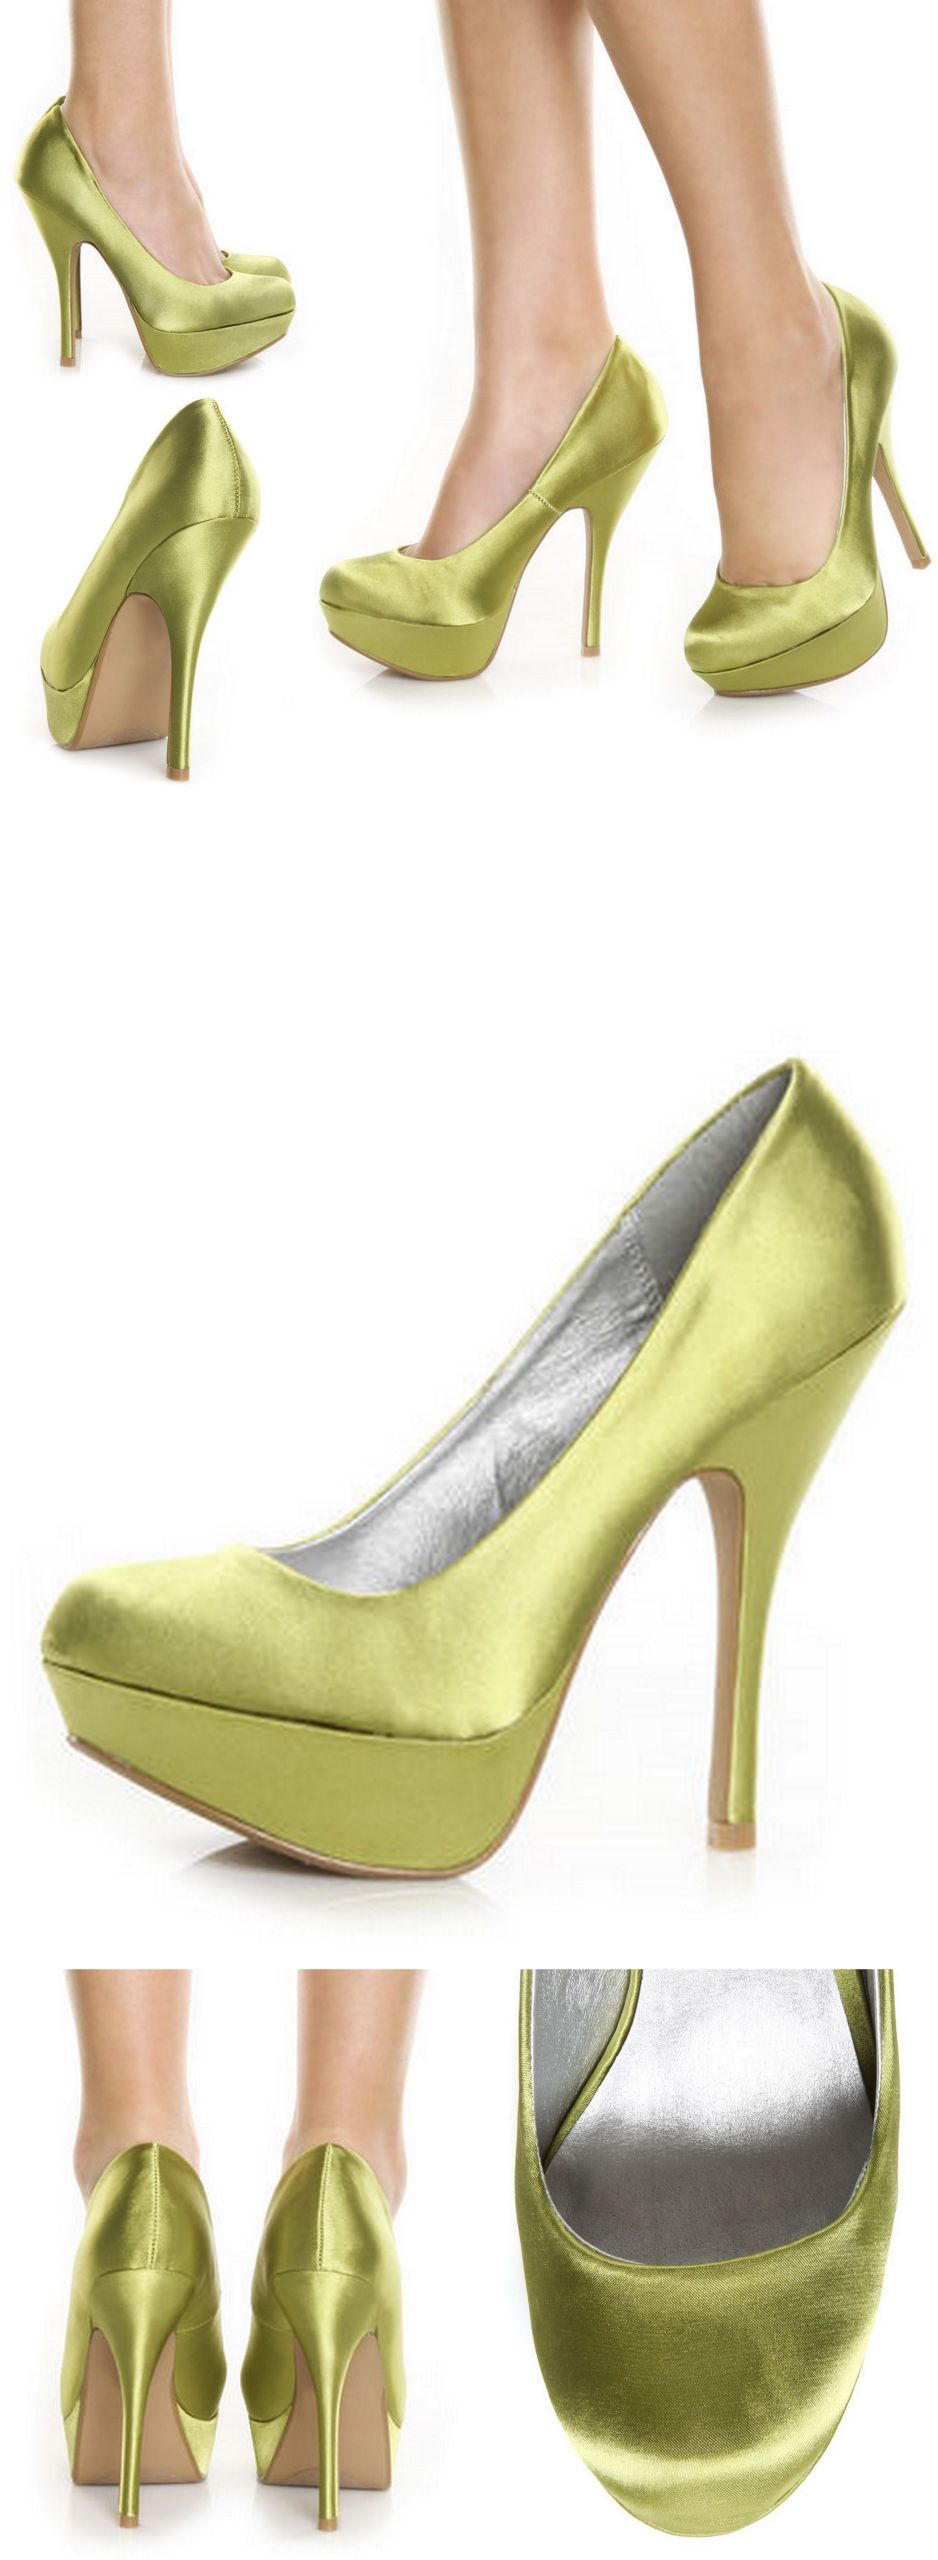 Lime Green Wedding Shoes
 Wedding Shoe Inspiration Lime Green Satin Pump by Lulu s